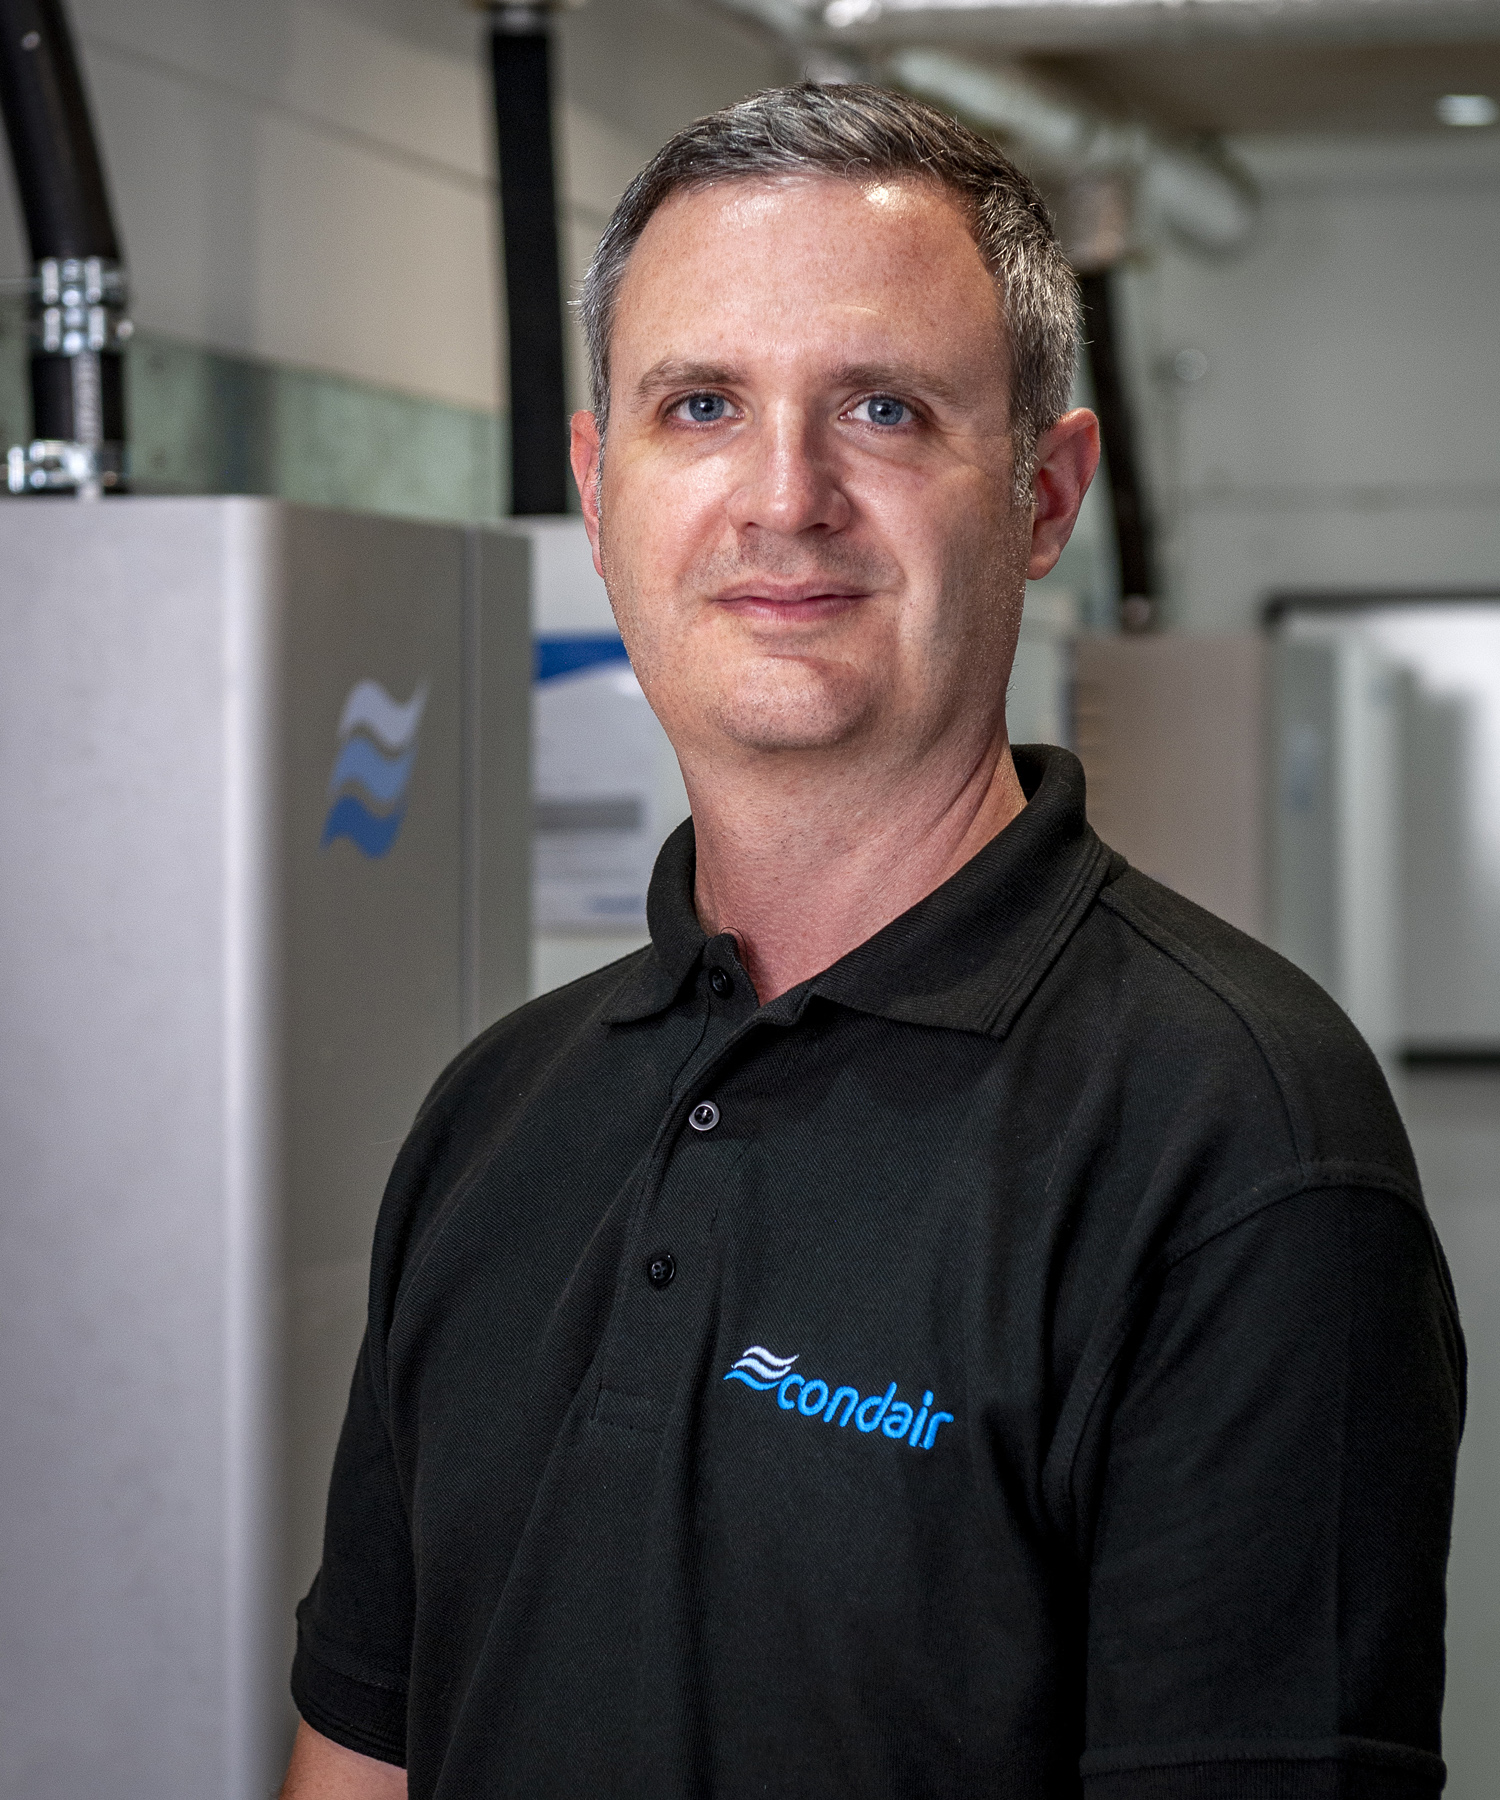 New Installation Manager at Condair